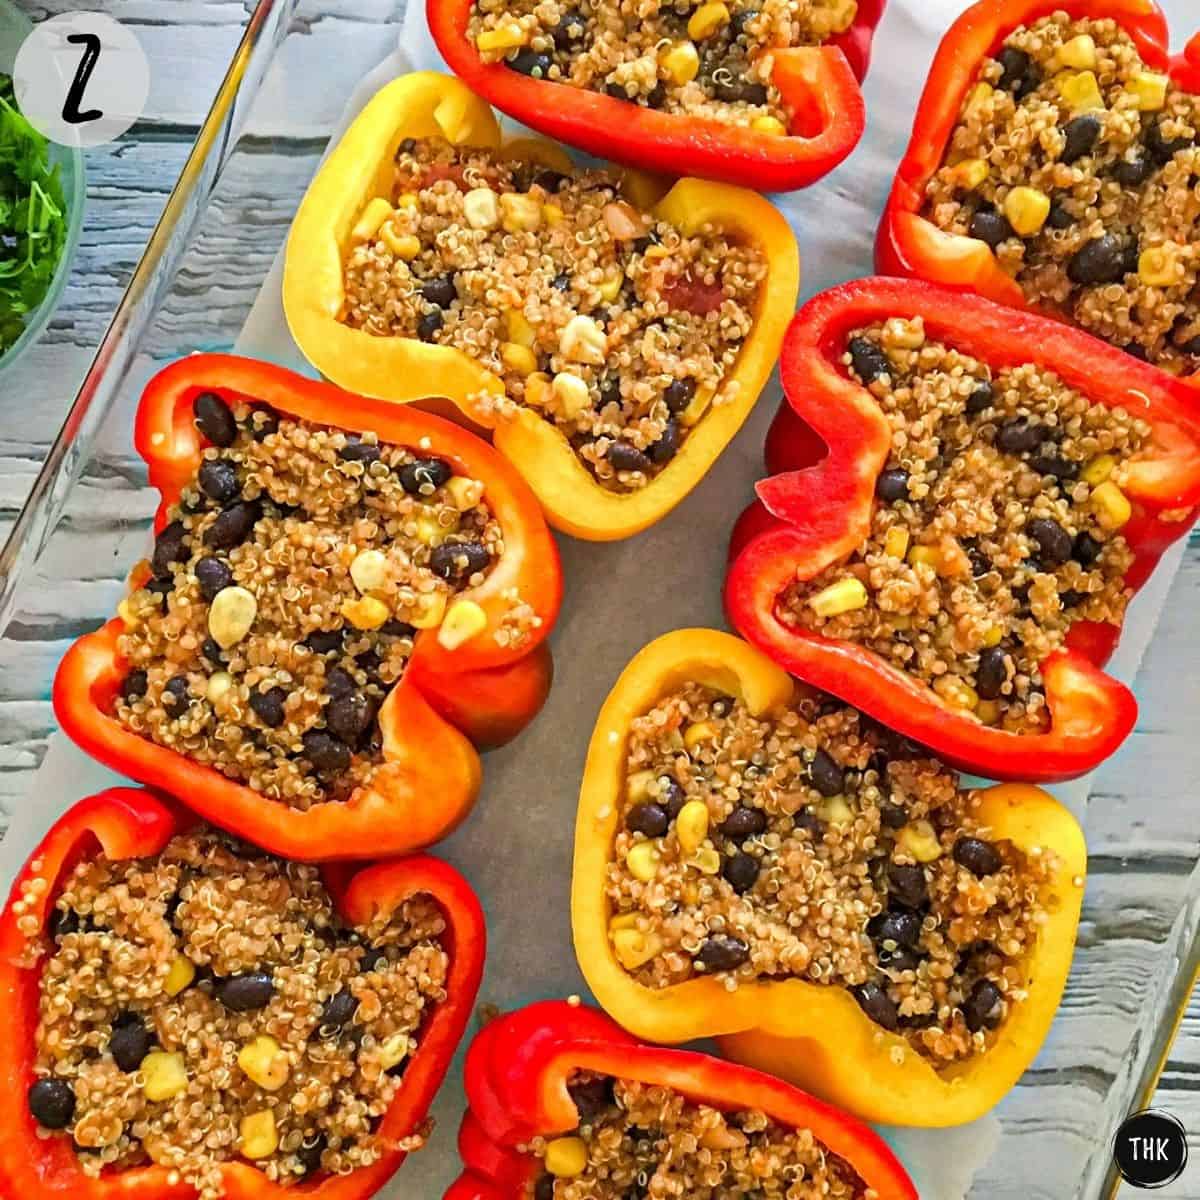 Bell pepper halves stuffed with quinoa, beans and corn.